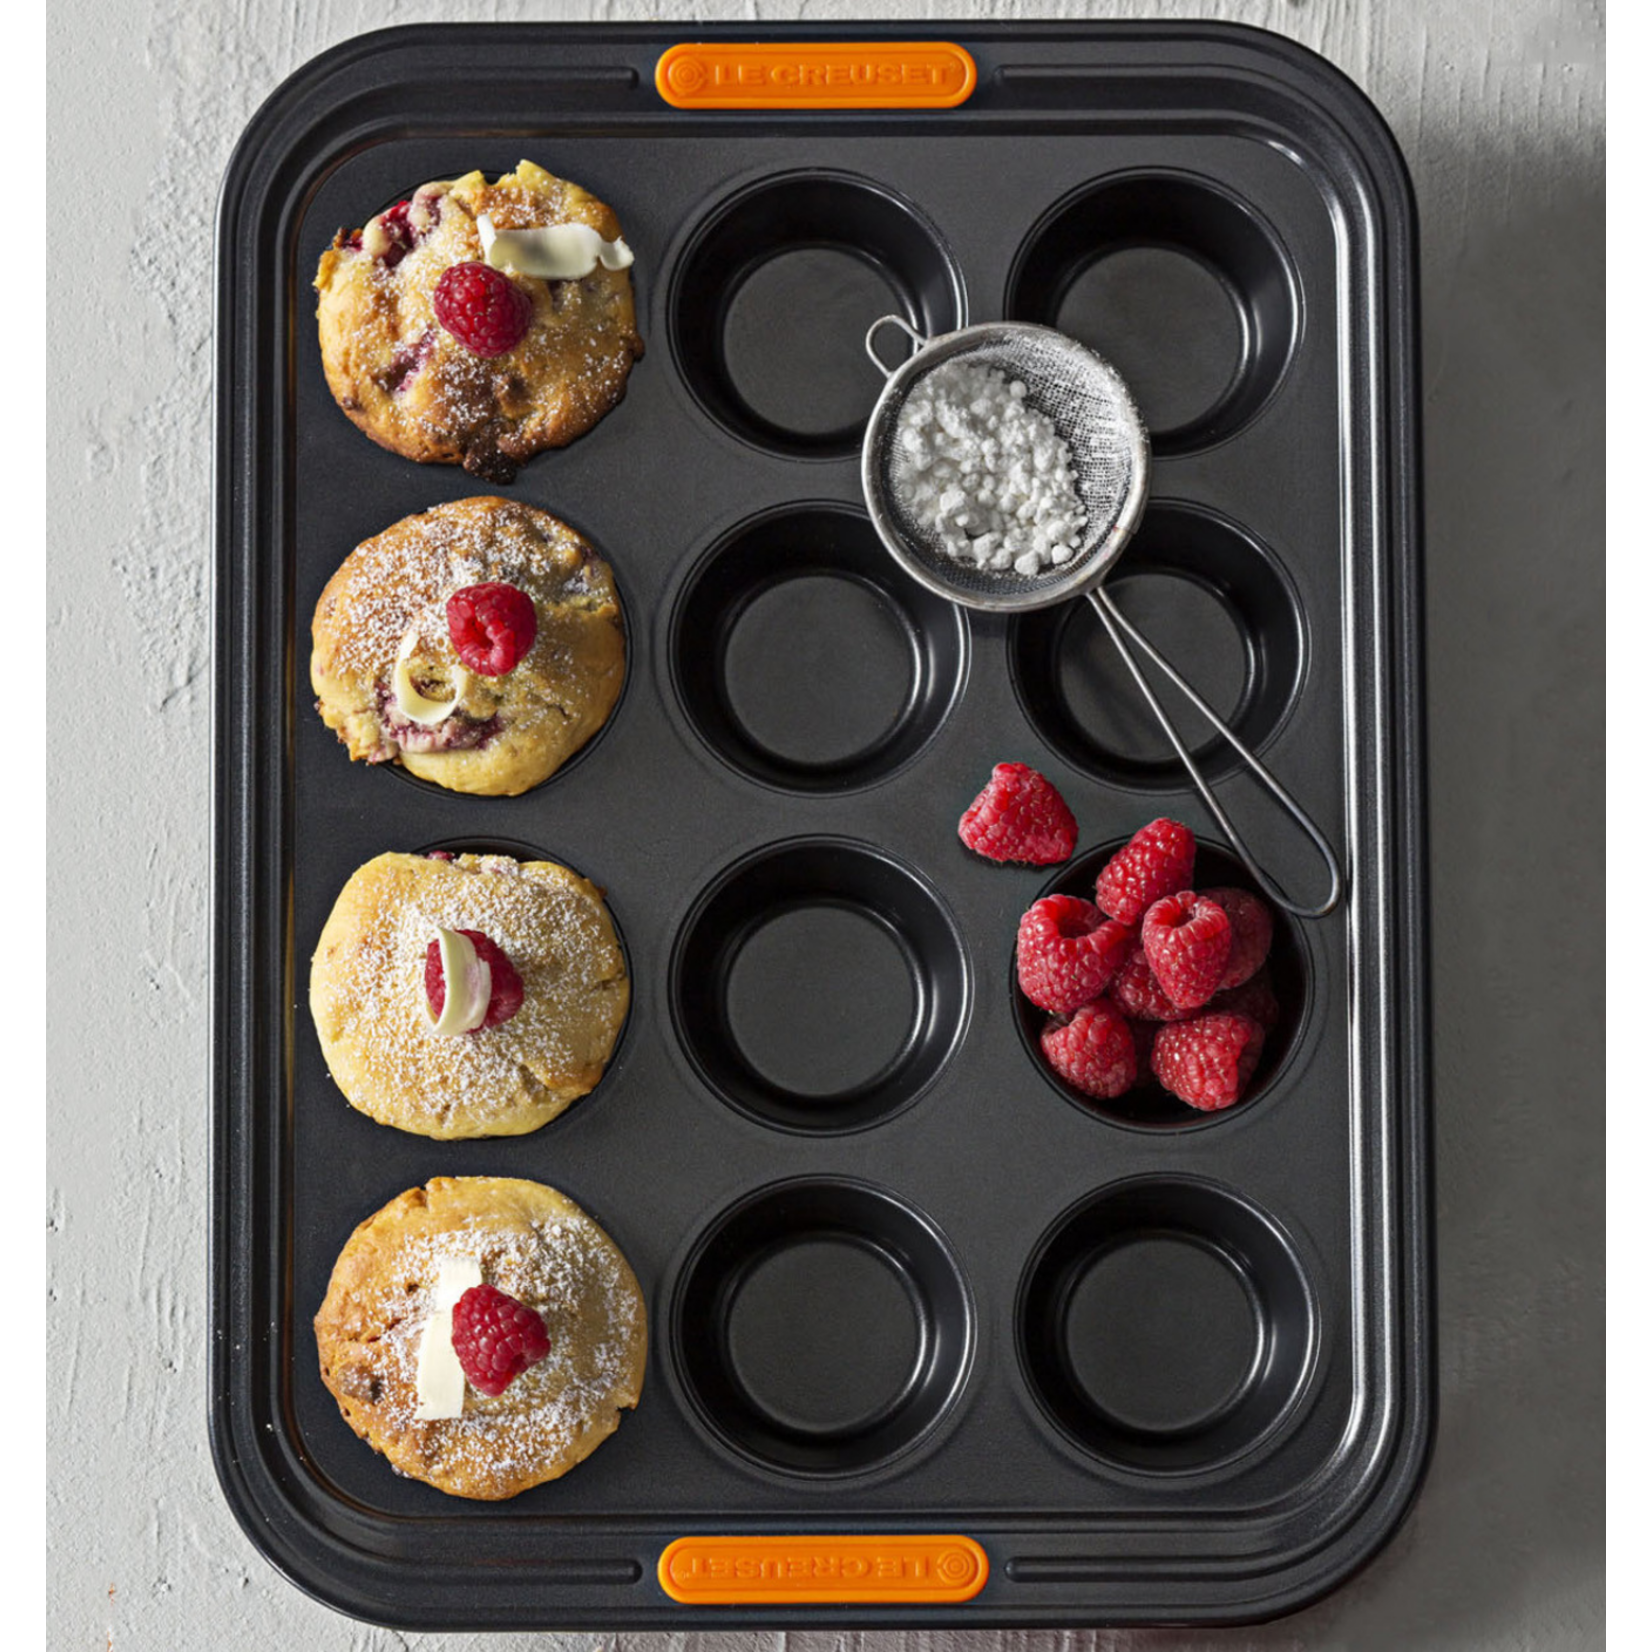 LE CREUSET LE CREUSET Muffin Pan 12 Cup